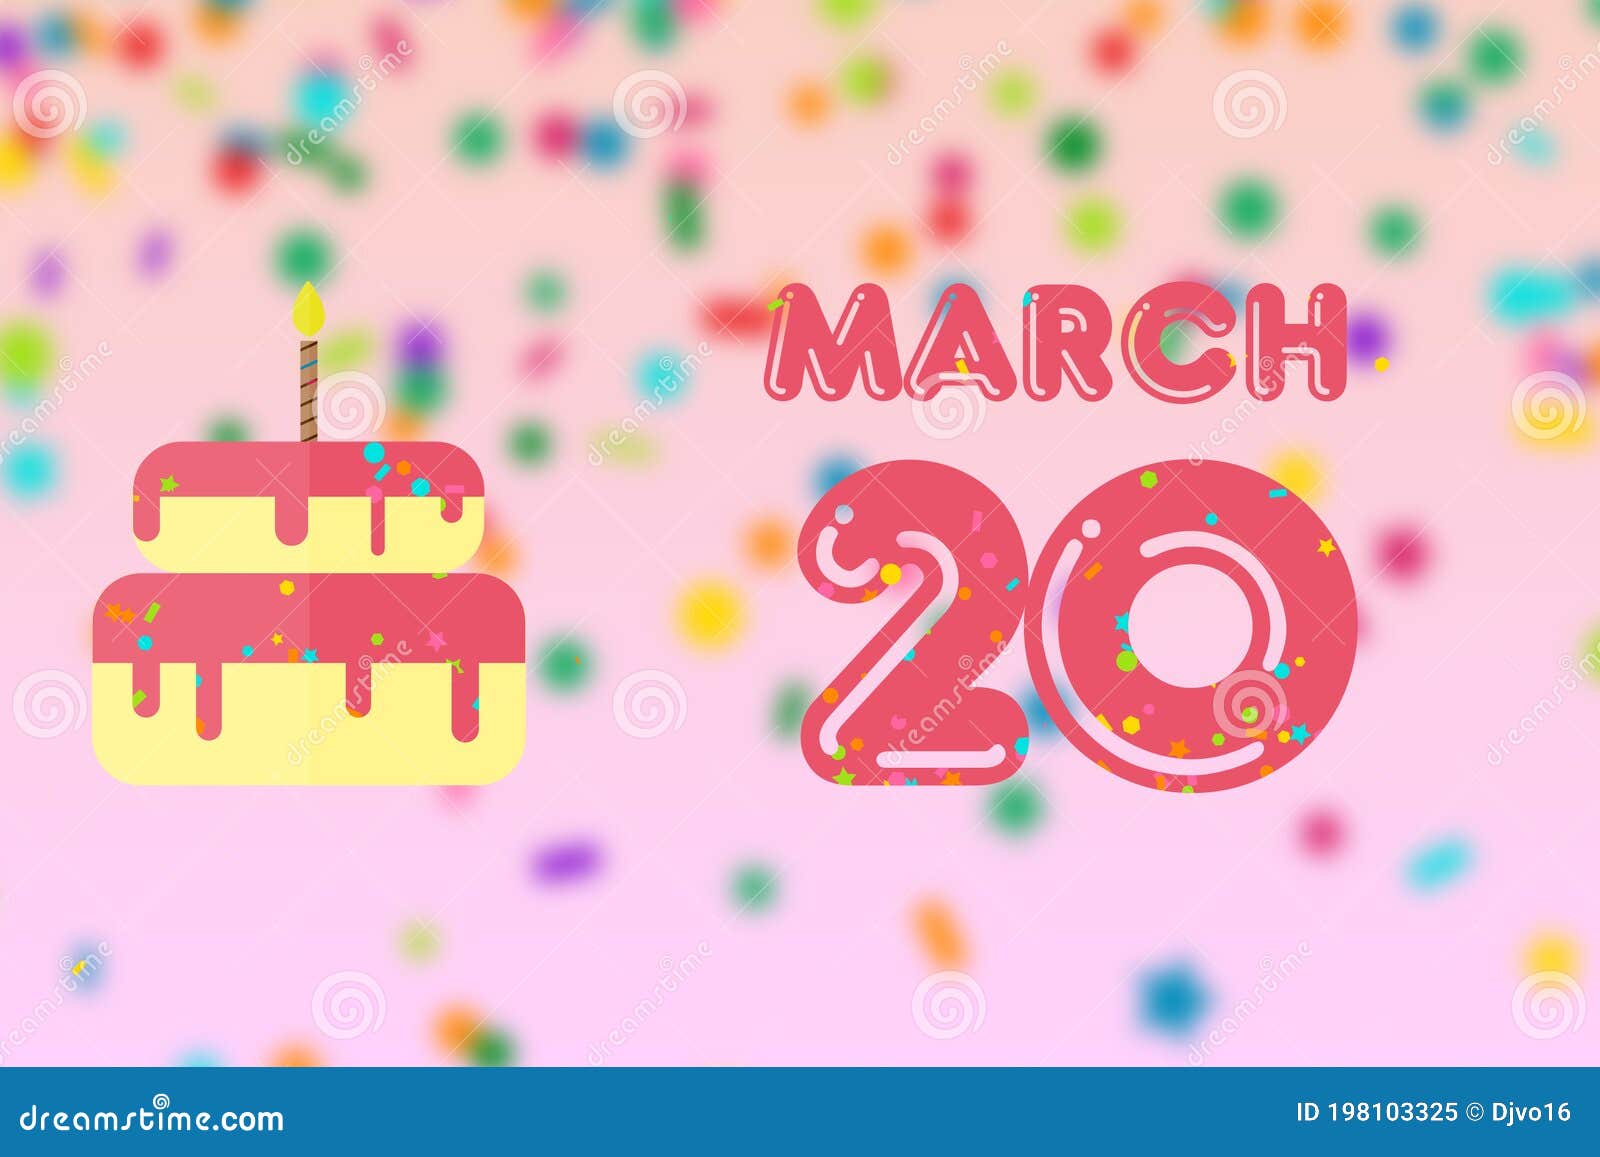 March 20th. Day 20 of Month,Birthday Greeting Card with Date of Birth and Birthday Cake. Spring Month, Day of the Year Concept Stock Illustration - Illustration of hello, greeting: 198103325